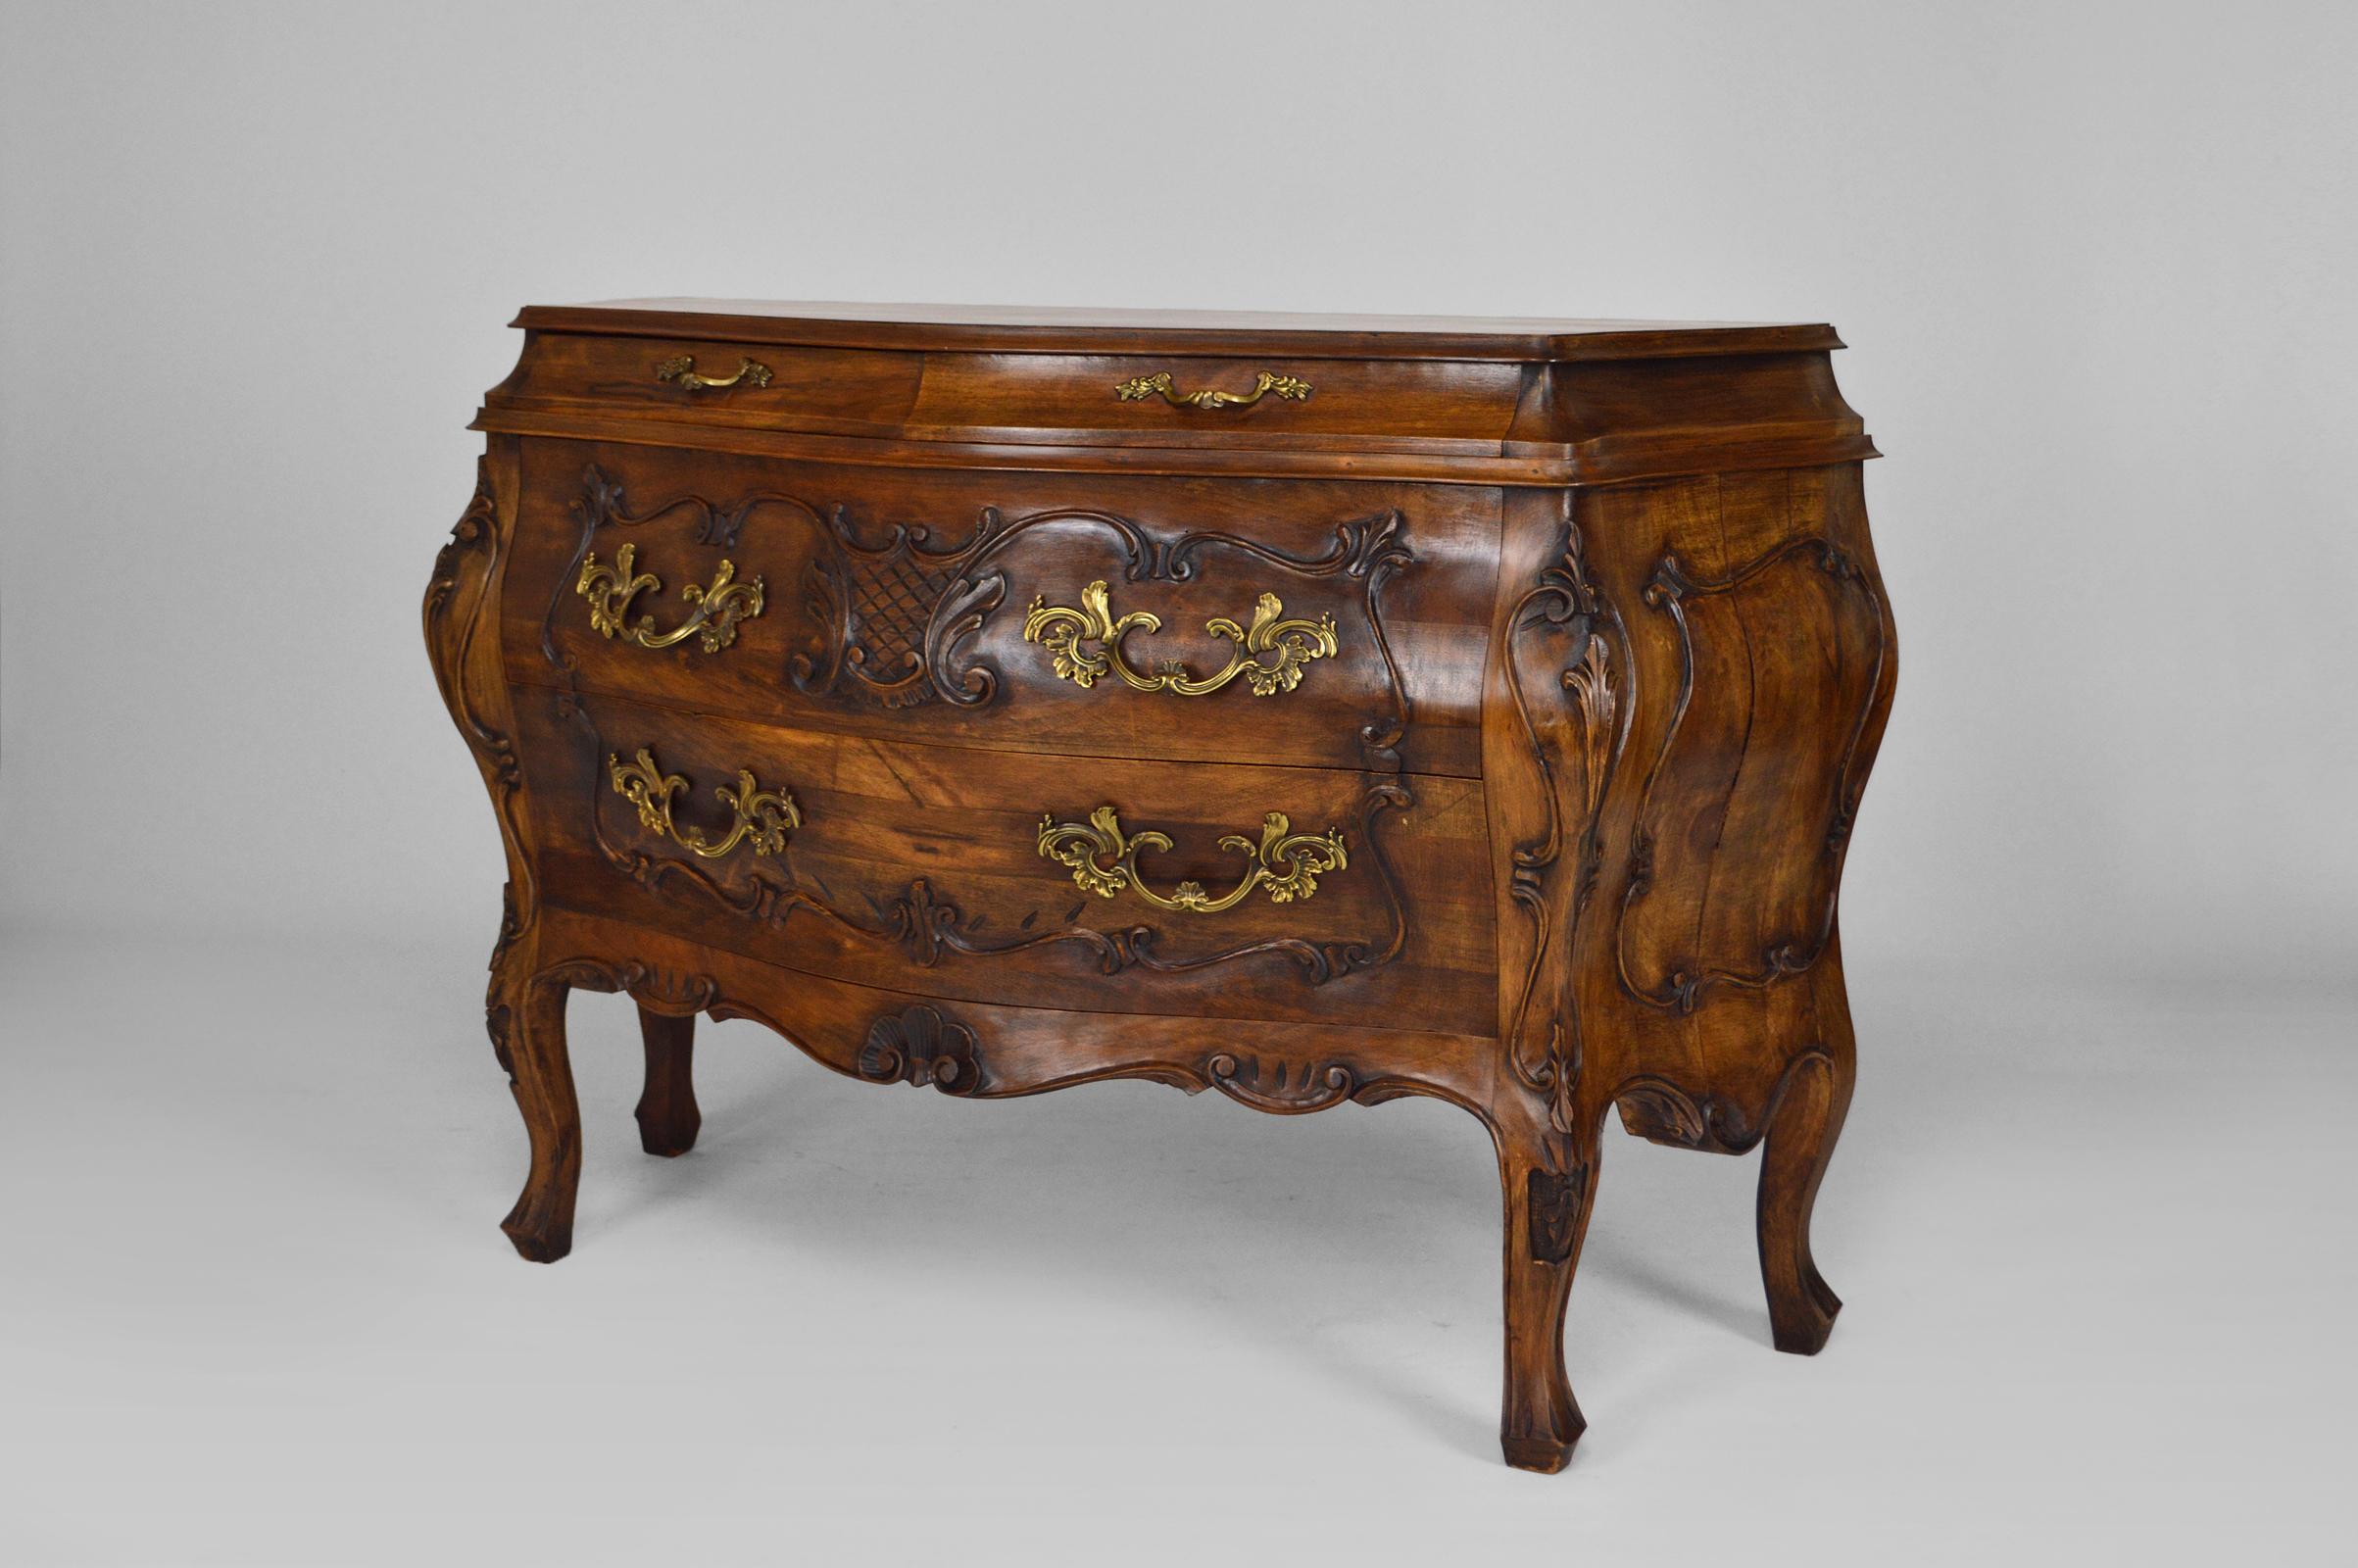 Amazing 4-drawer commode / chest of drawers.

In carved walnut wood.

Rococo / Louis XV style.
20th century.

In excellent condition.